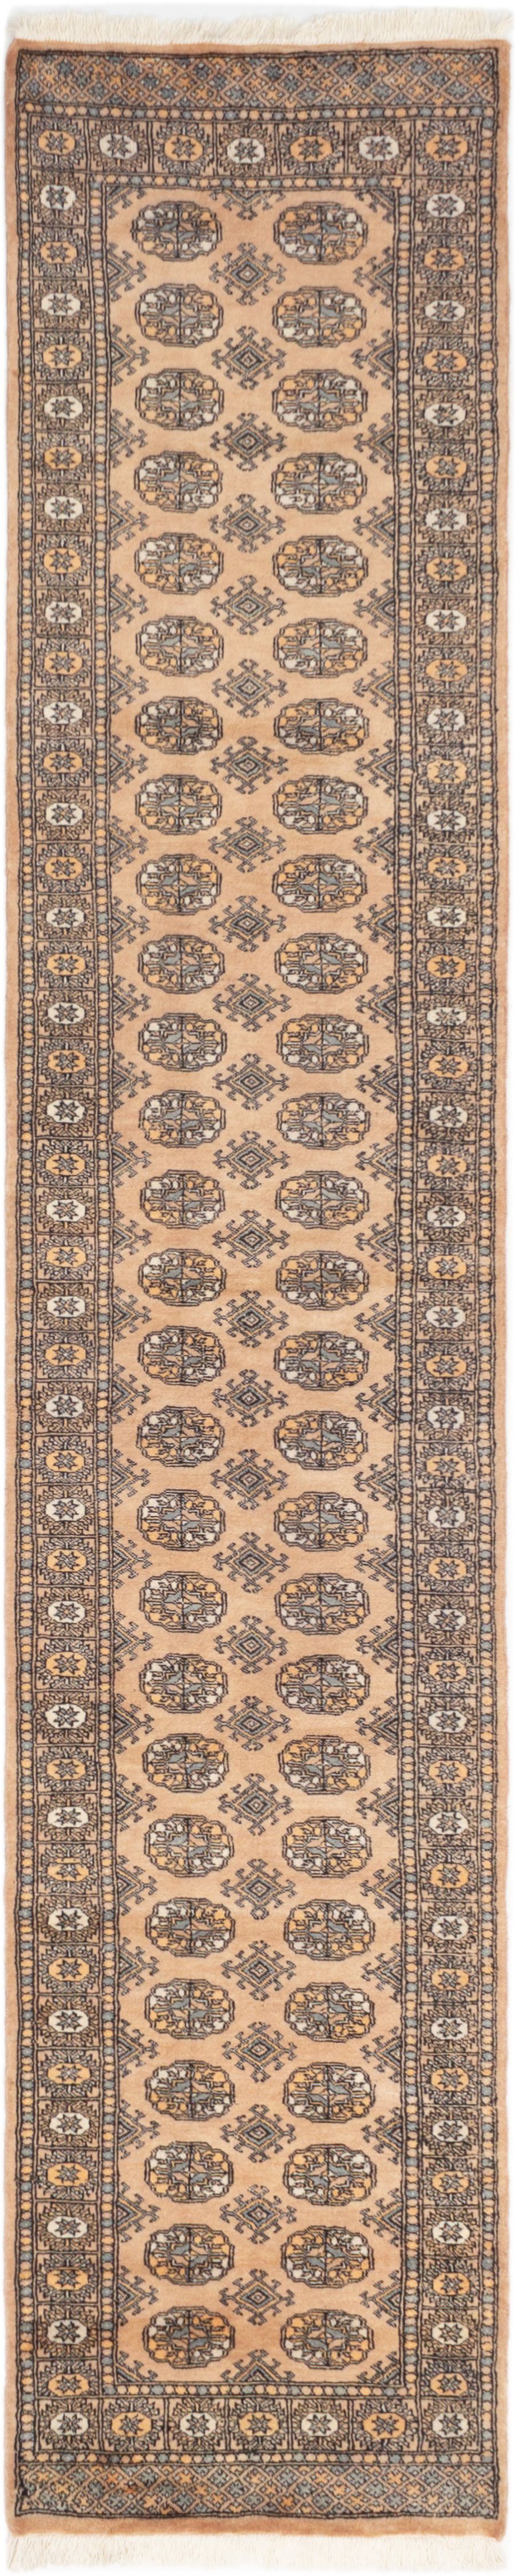 Hand-knotted Finest Peshawar Bokhara Tan Wool Rug 2'8" x 13'1" Size: 2'8" x 13'1"  